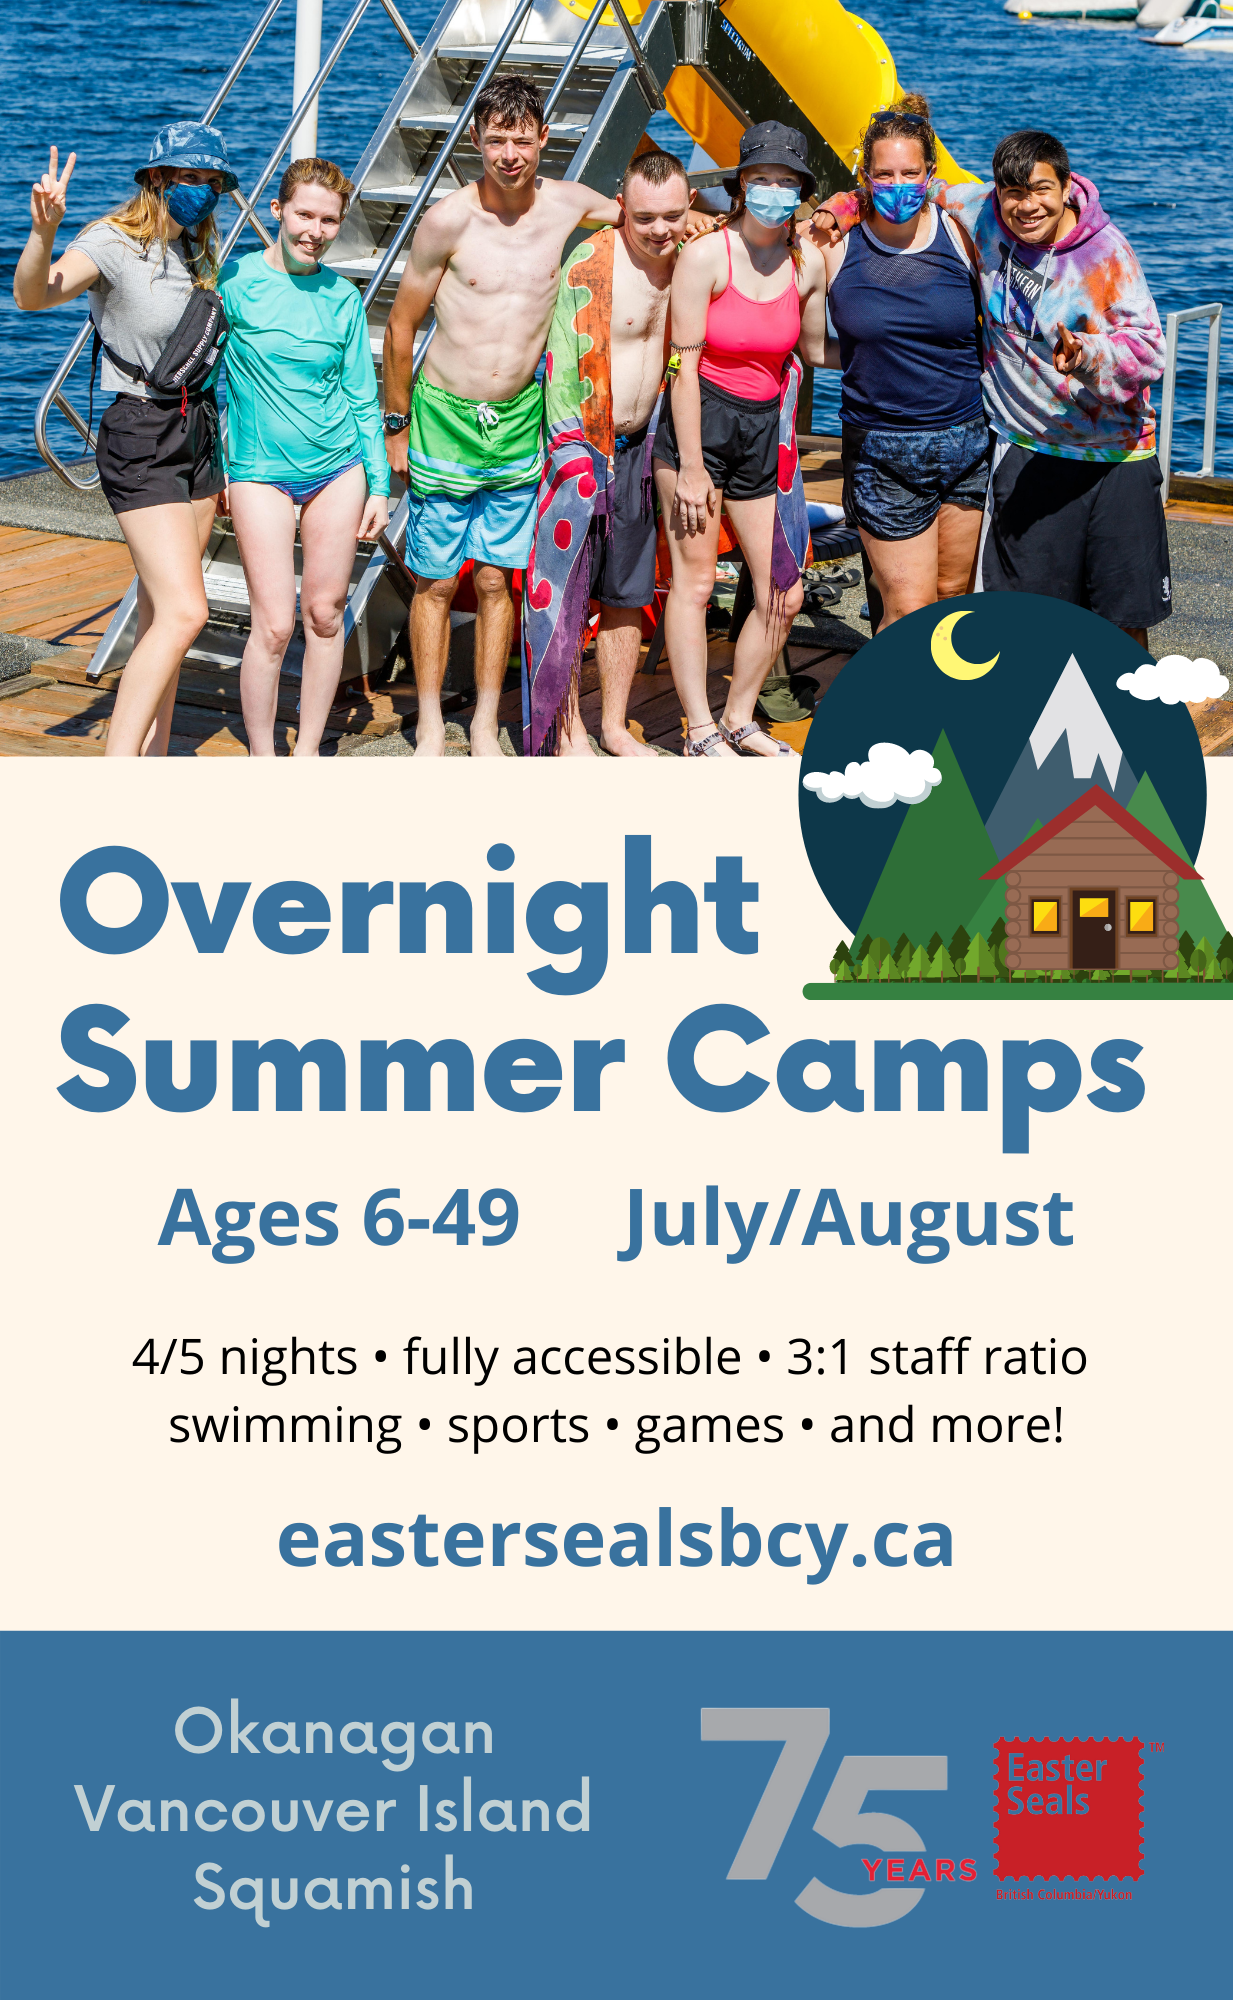 Easter Seals Overnight Summer Camp (Squamish)